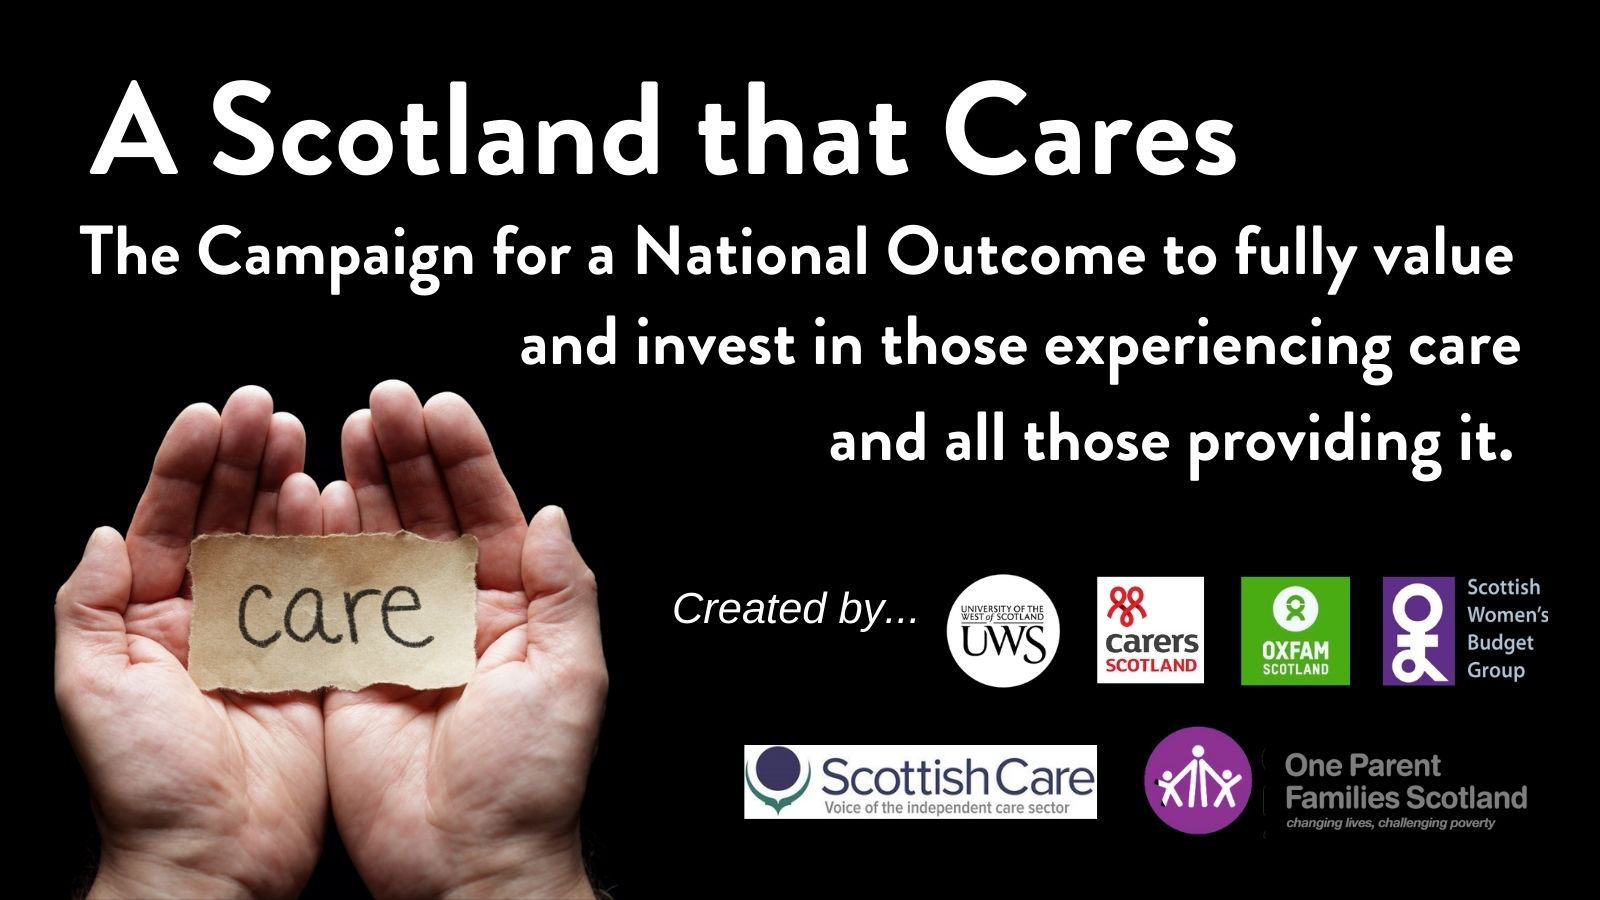 Don’t pretend carers living in poverty is a new problem for Scotland